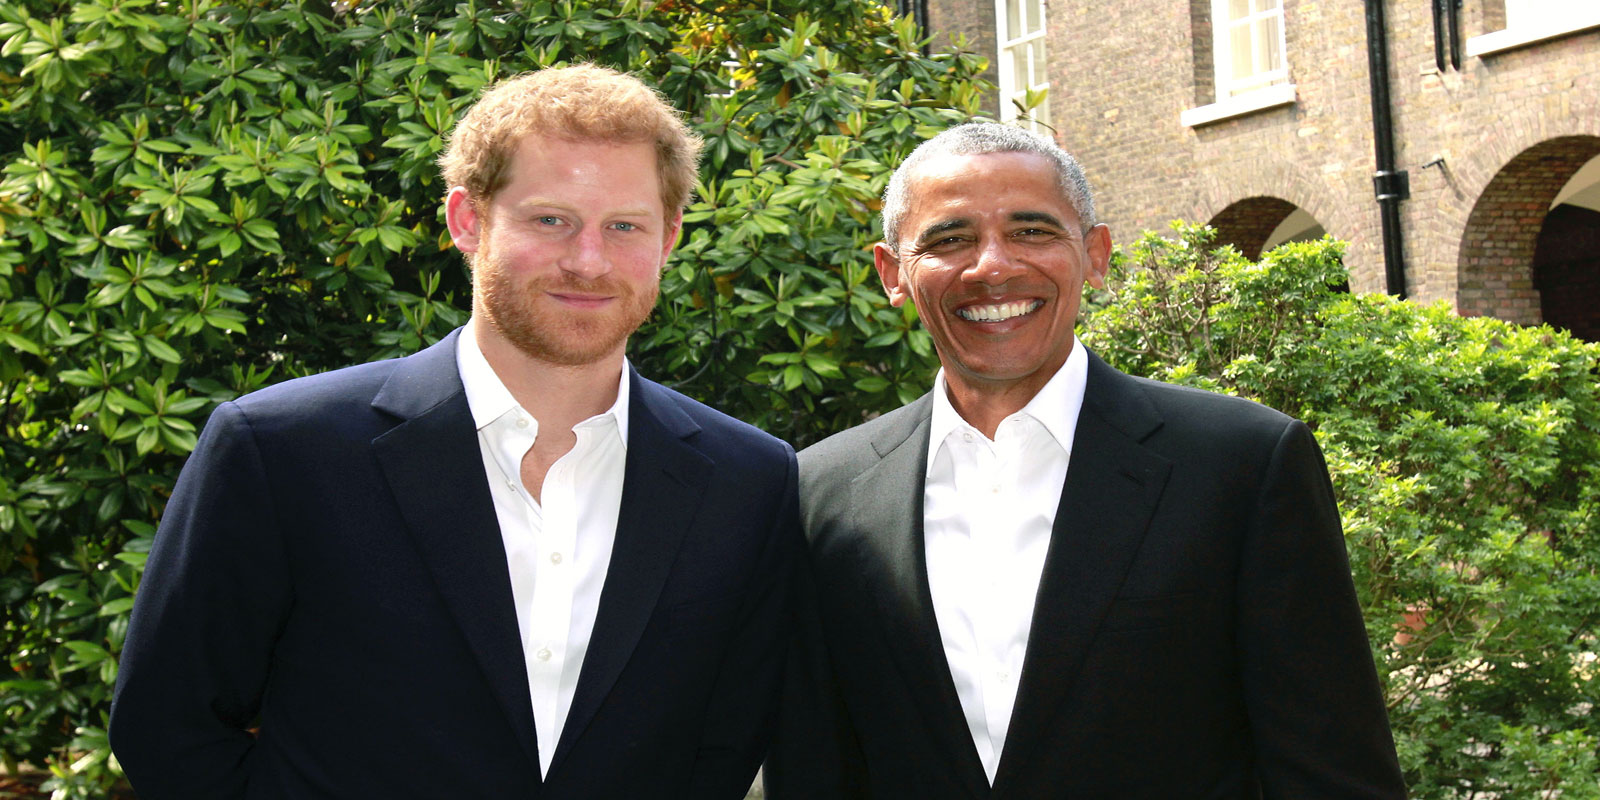 A handout out photo released by Kensington Palace shows Britain´s Prince Harry posing for a photograph with former US President US, Barack Obama following a meeting at Kensington Palace in London on May 27, 2017.